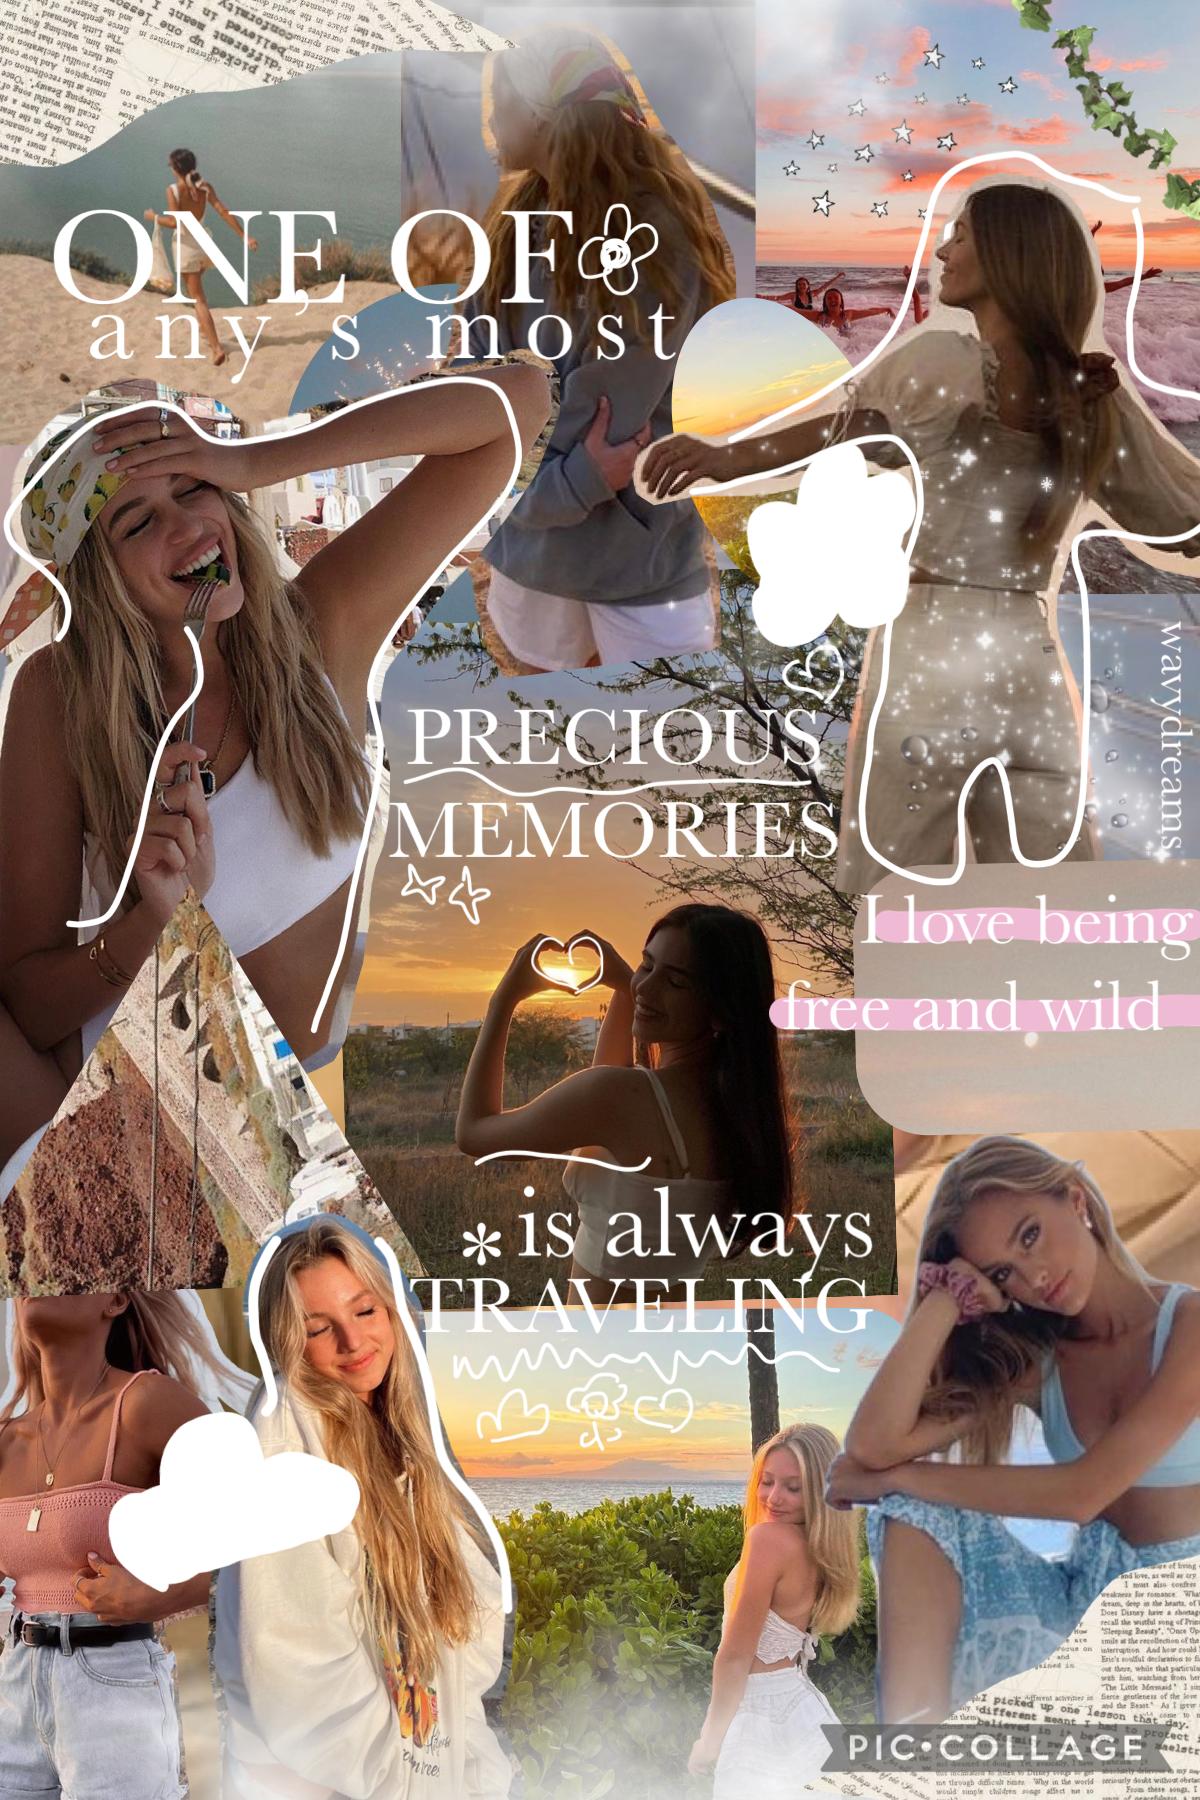 🌙tap plz!🌙
Hey dreamers! What’s up? This collage is inspired by the one and only @meandmeonly!! Hope you like it💕 follow me on my new insta account (the old one’s password was forgotten) @shootingdreams! That’s all for now, love you! <3